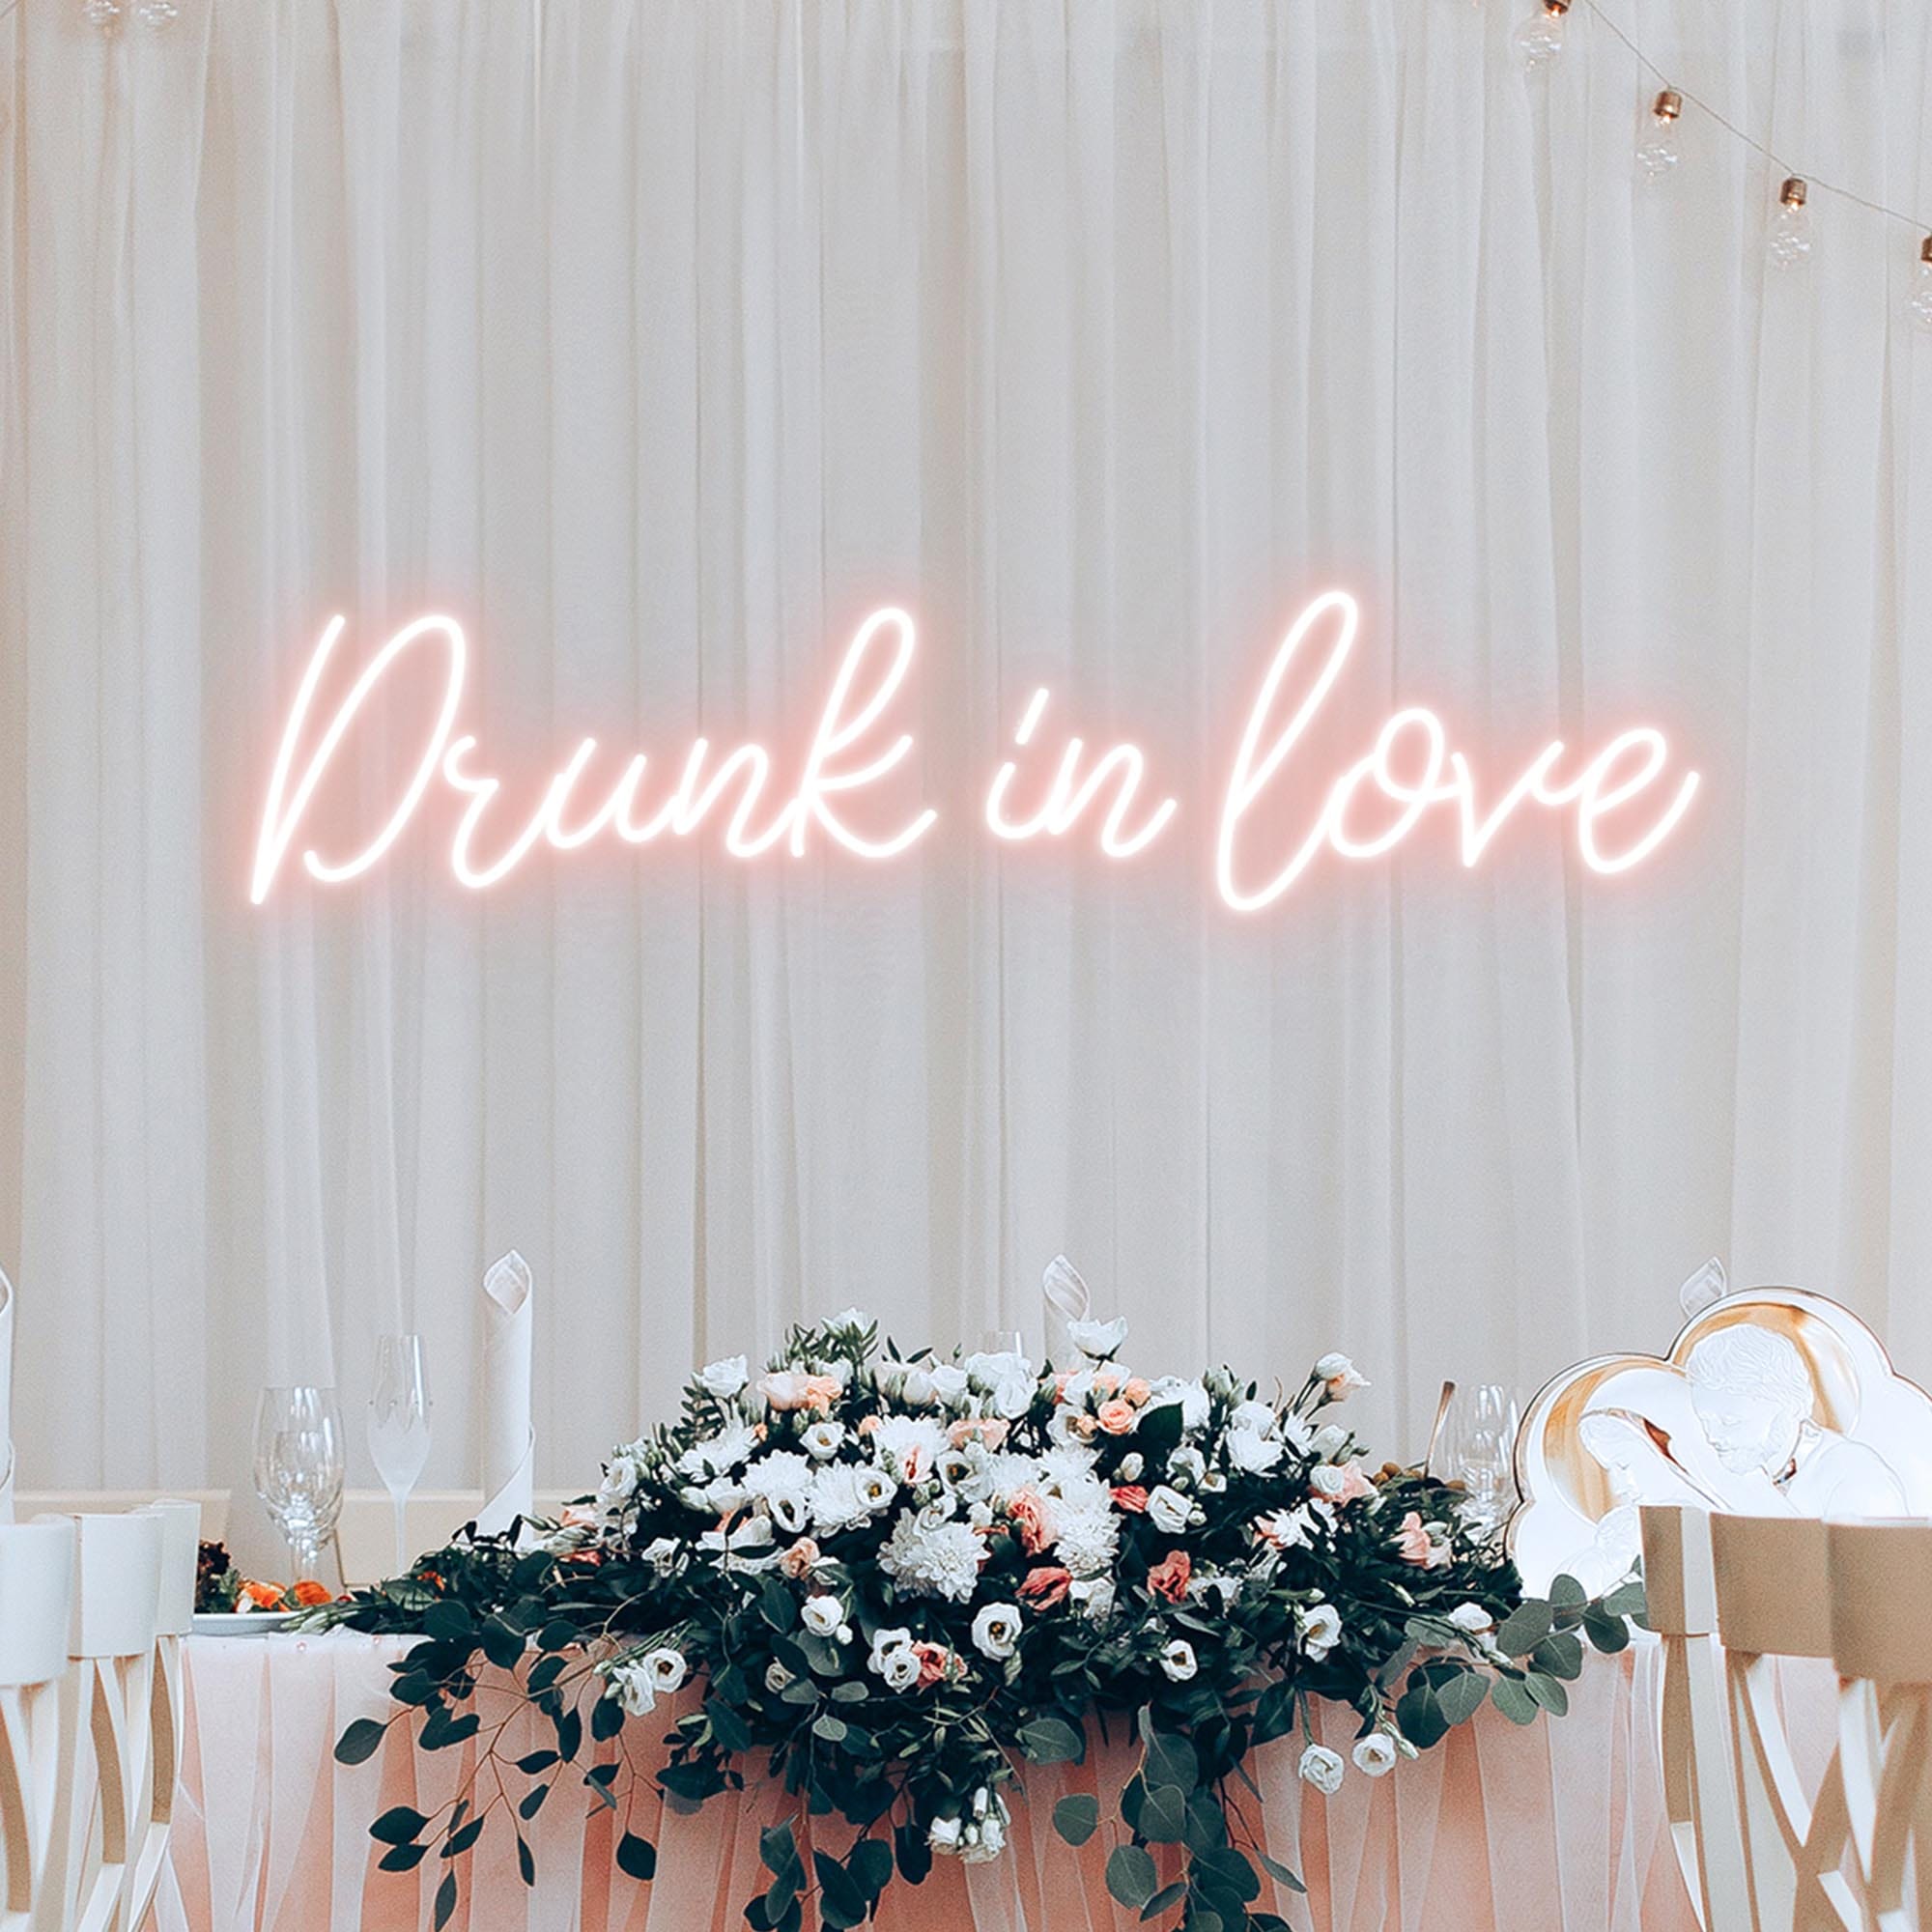 A pink neon sign with the letters "Drunk in Love" was hung in a wedding ceremony